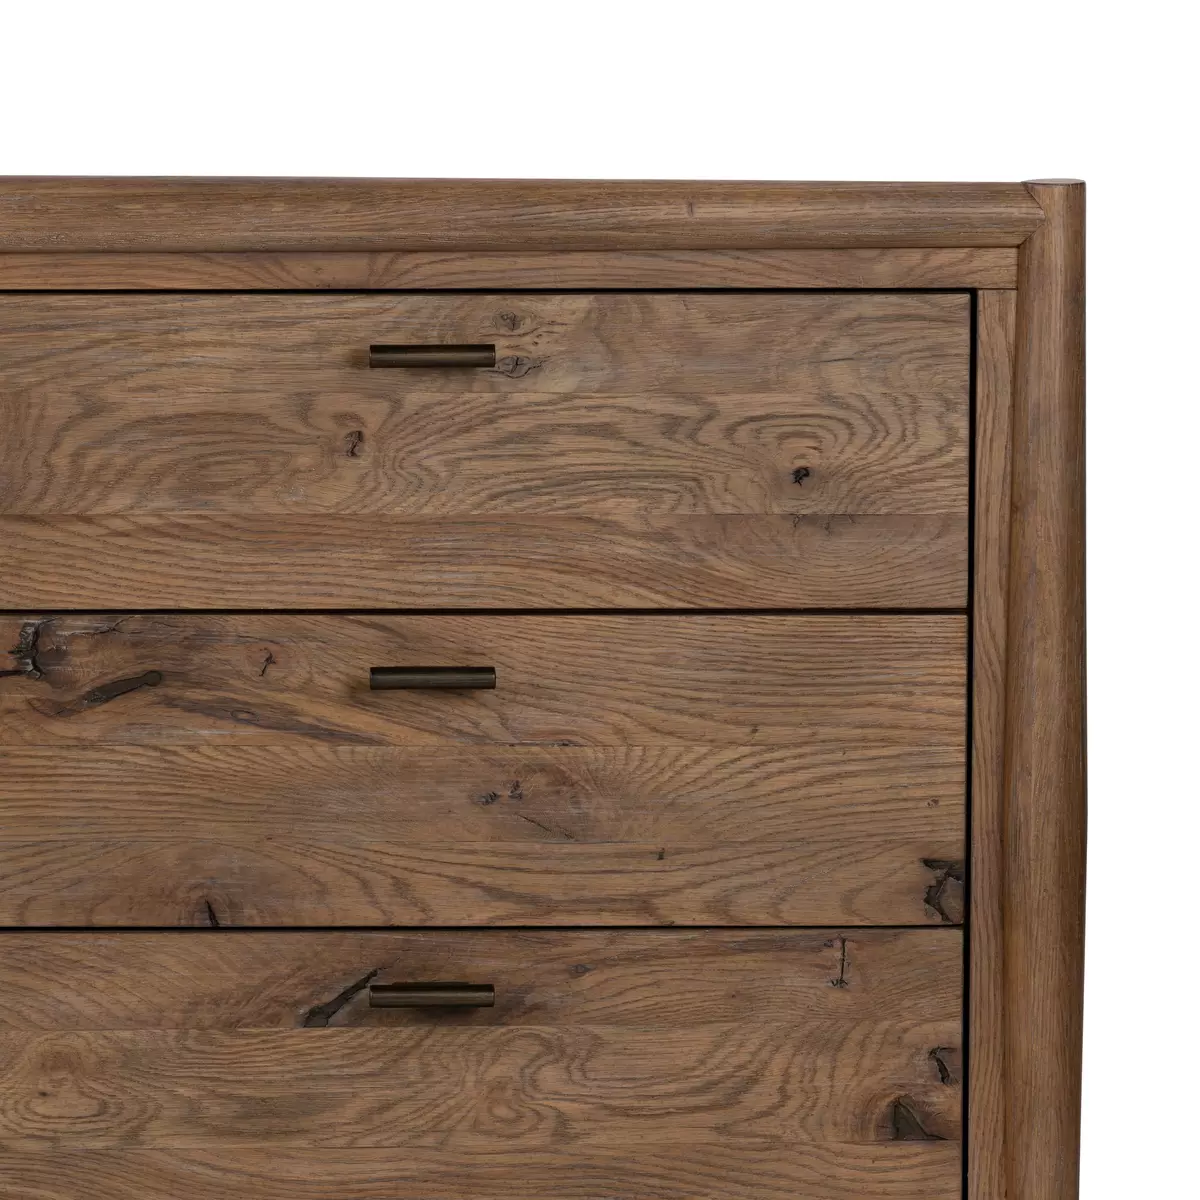 PH Small Drawer Chest with Brass Legs, Natural Oak Veneer & White